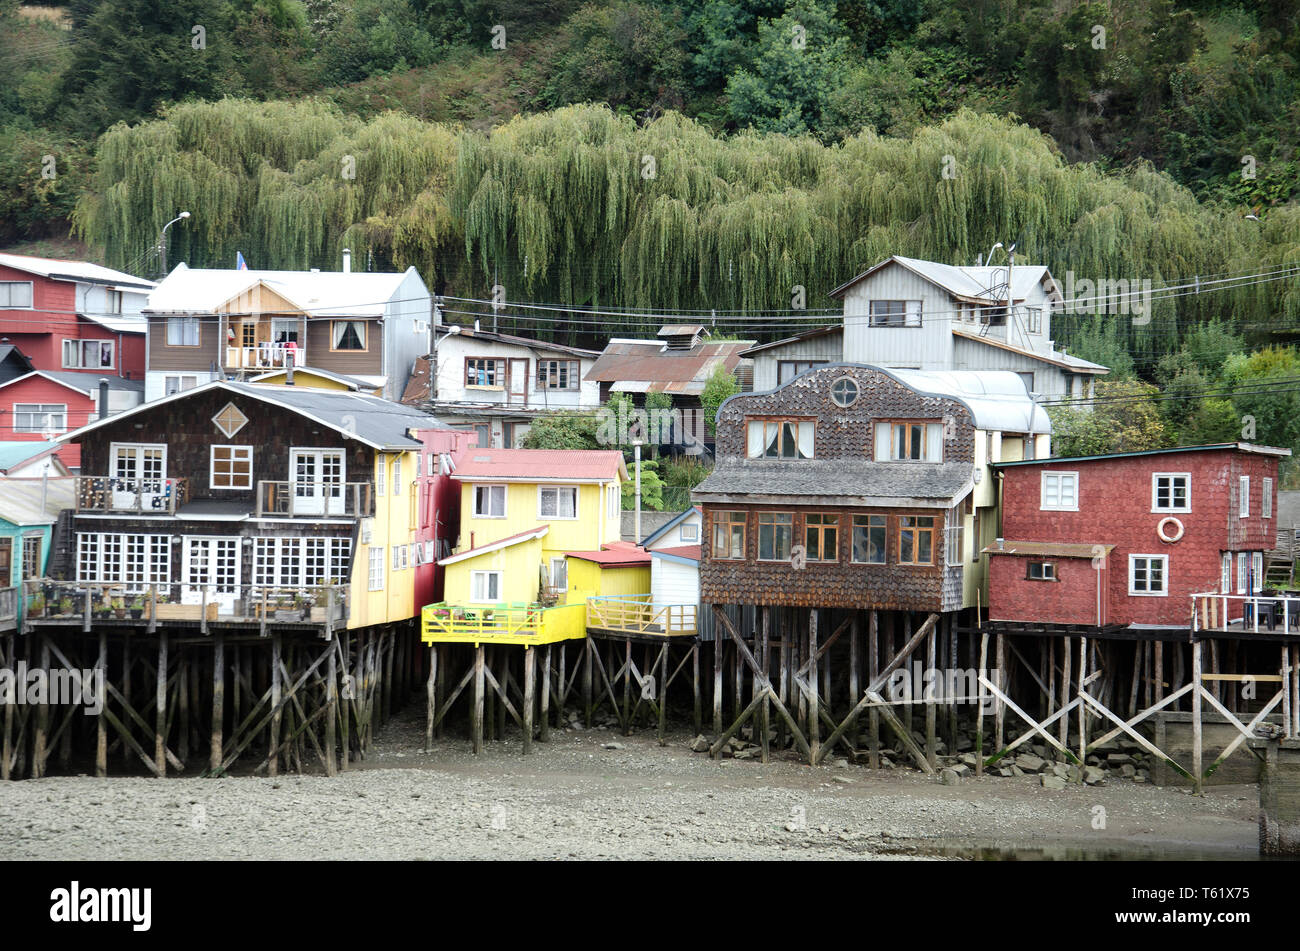 Houses on stilts, palafitos, at low tide, at the edge of Chiloé island's capital, Castro, in Chile Stock Photo